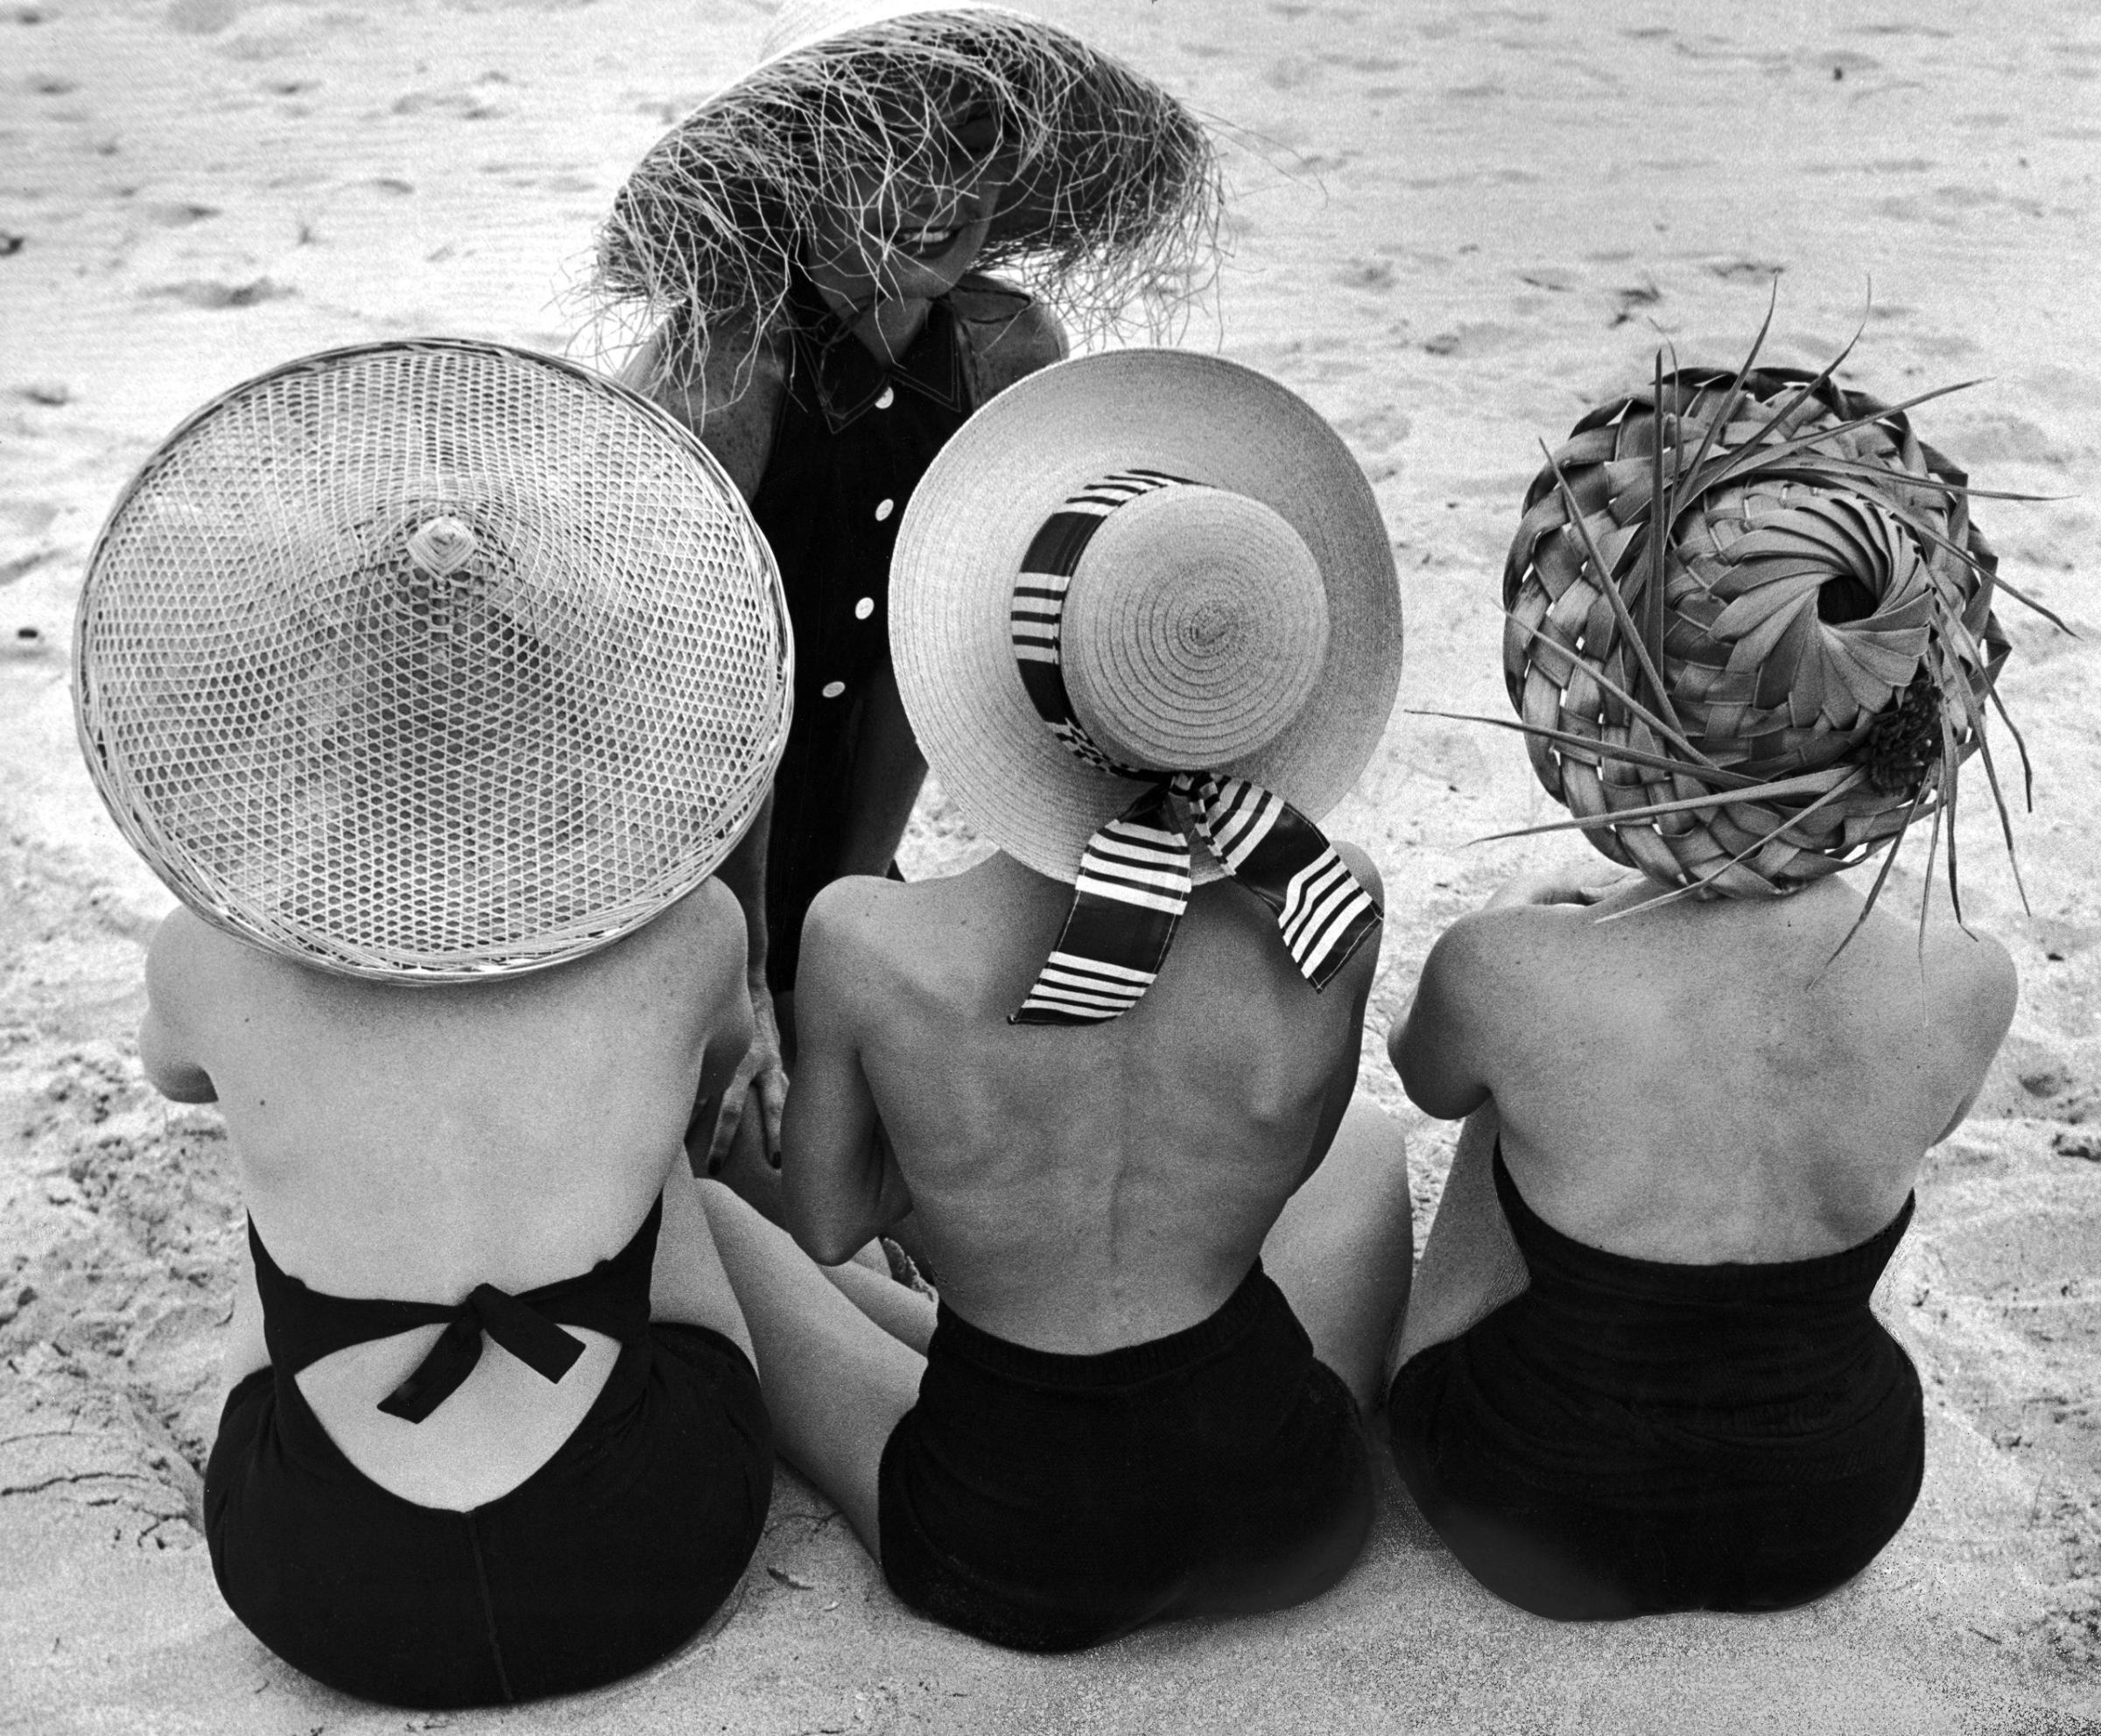 Models on beach wearing different designs of straw hats. 1950.